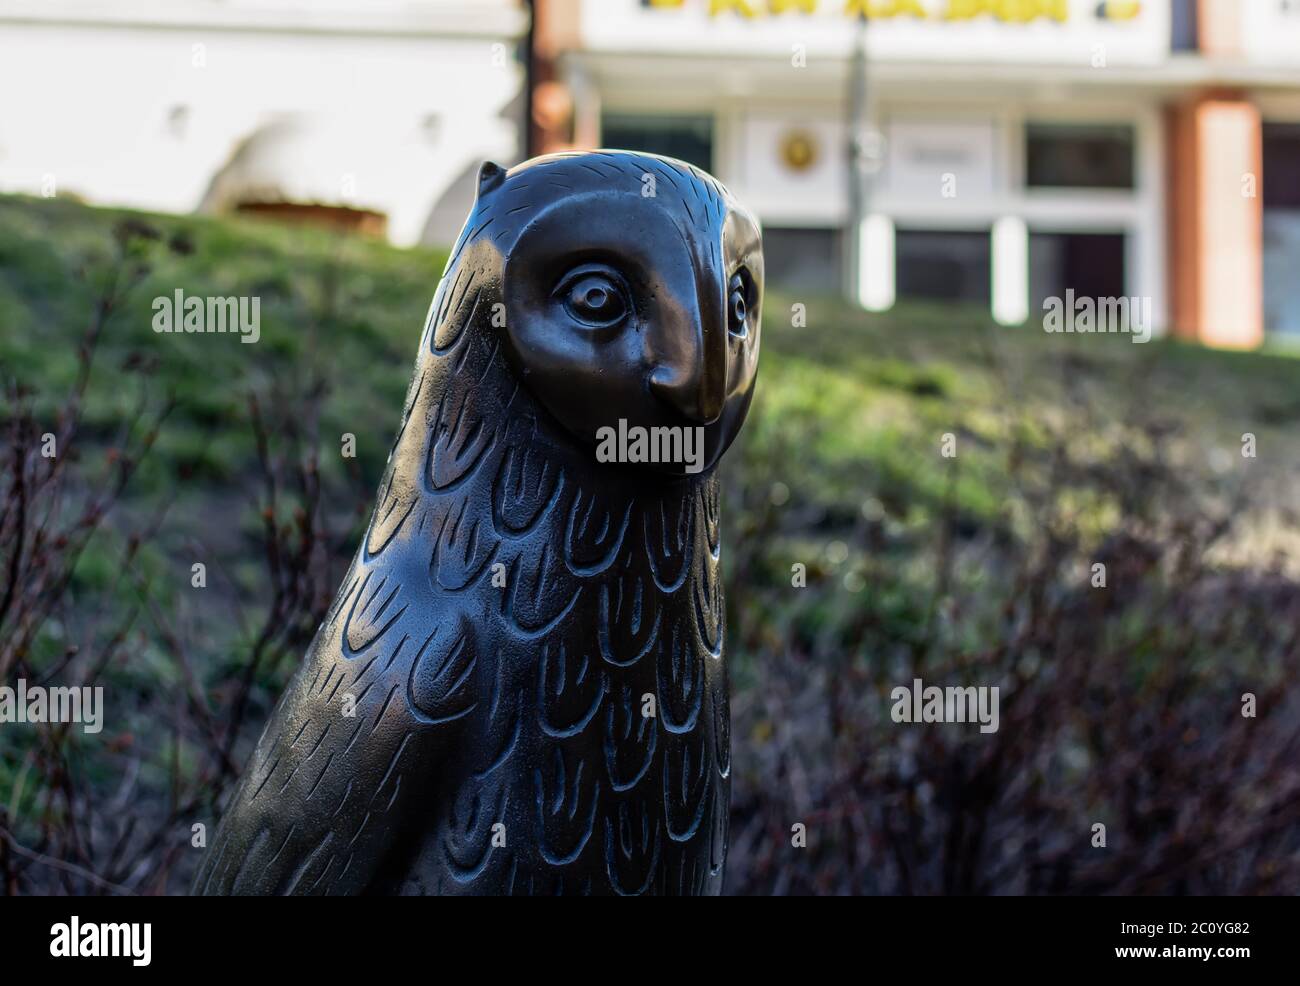 Head of bronze owl sculpture at the Old Town's Doma Square playground Stock Photo